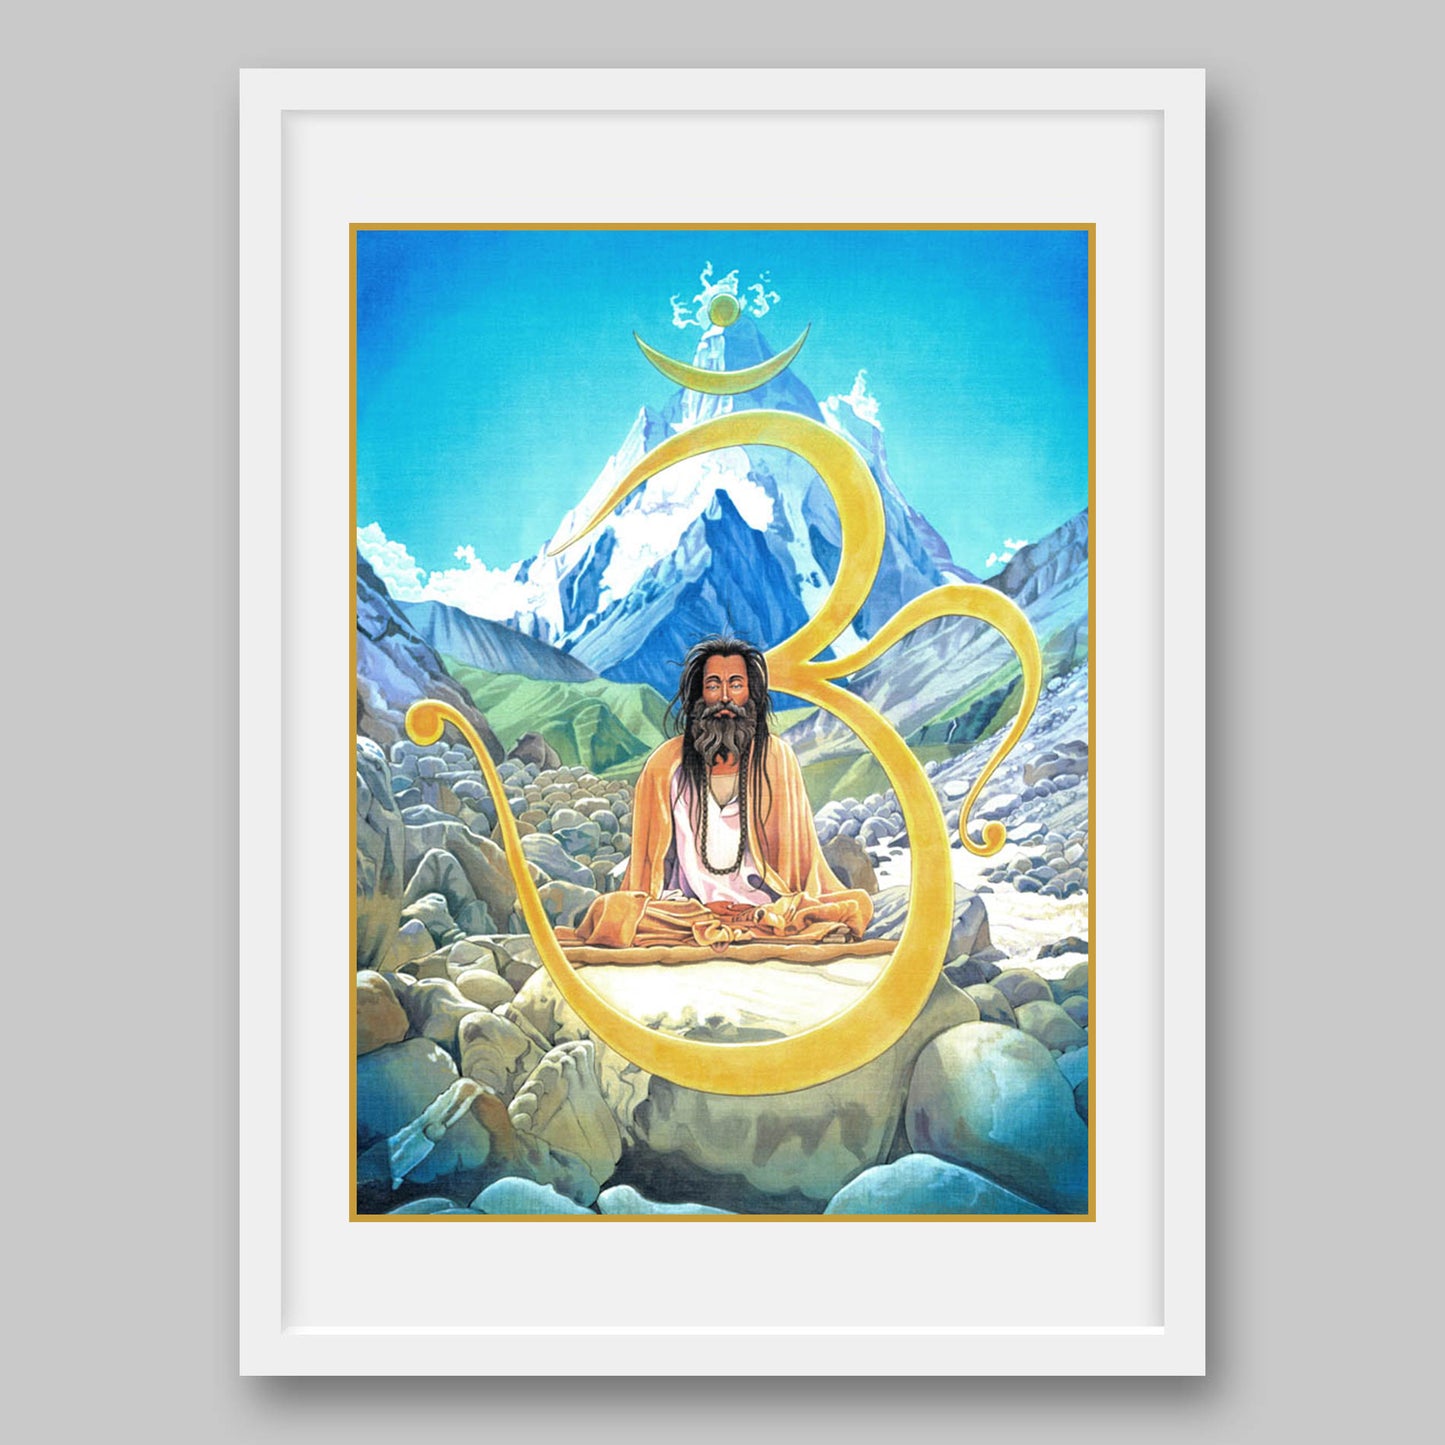 Om – Sound of the cosmos – High Quality Print of Artwork by Pieter Weltevrede